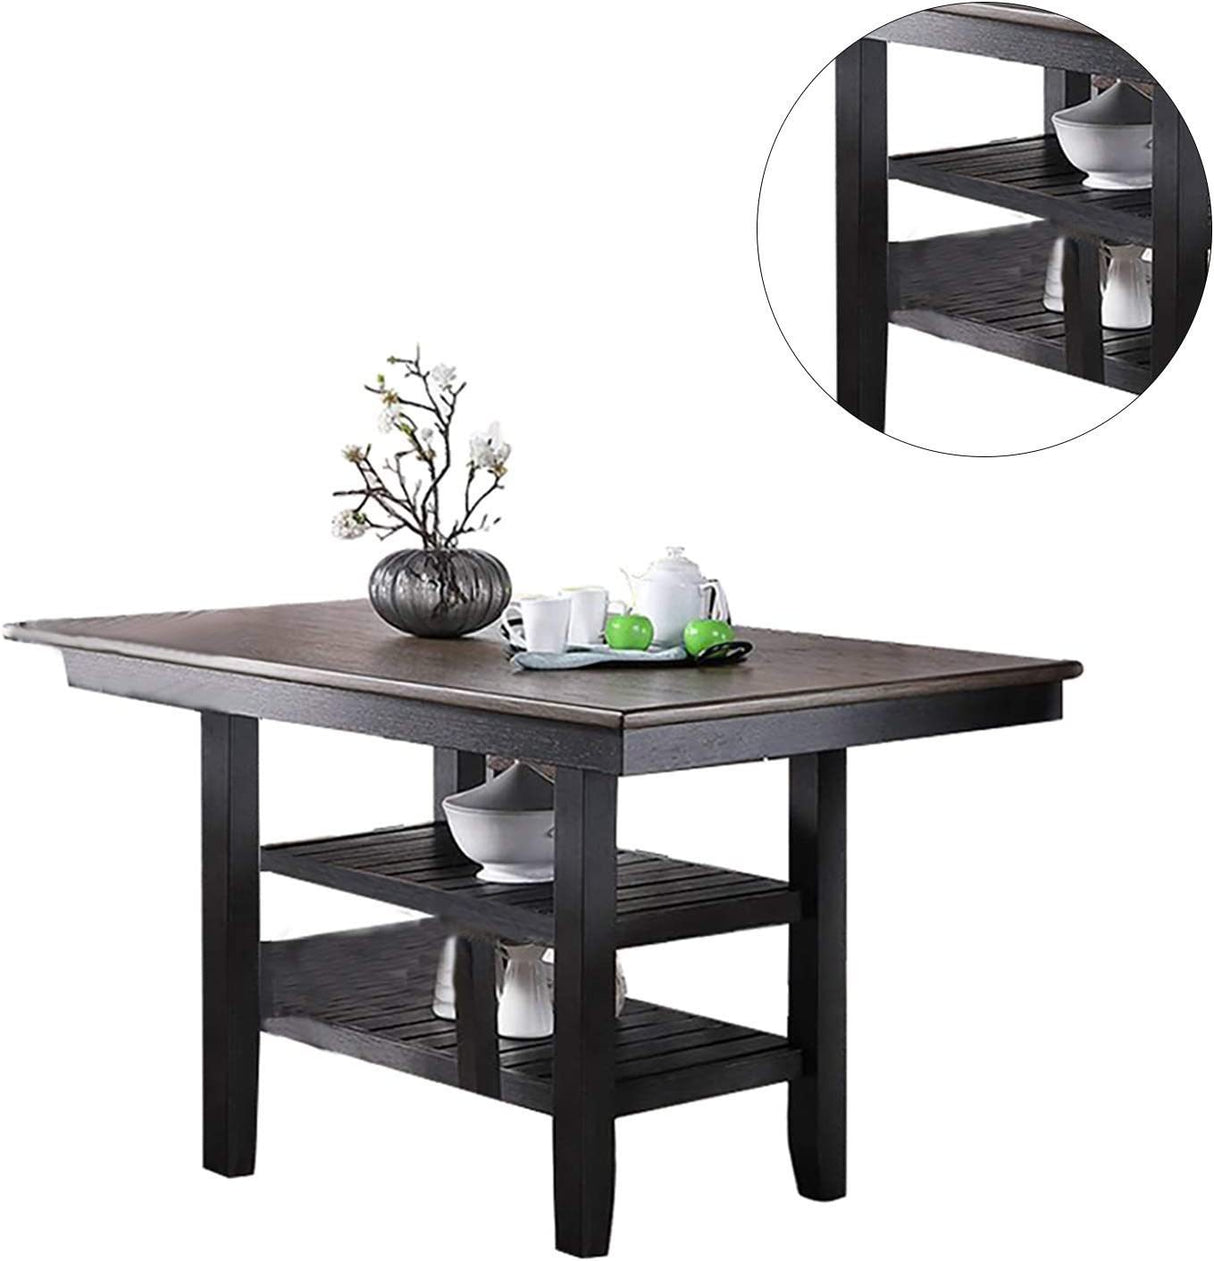 1pc Cunter Height Dining Table Dark Coffee Finish Kitchen Breakfast Dining Room Furniture Table w 2x Storage Shelve Rubber wood - Home Elegance USA